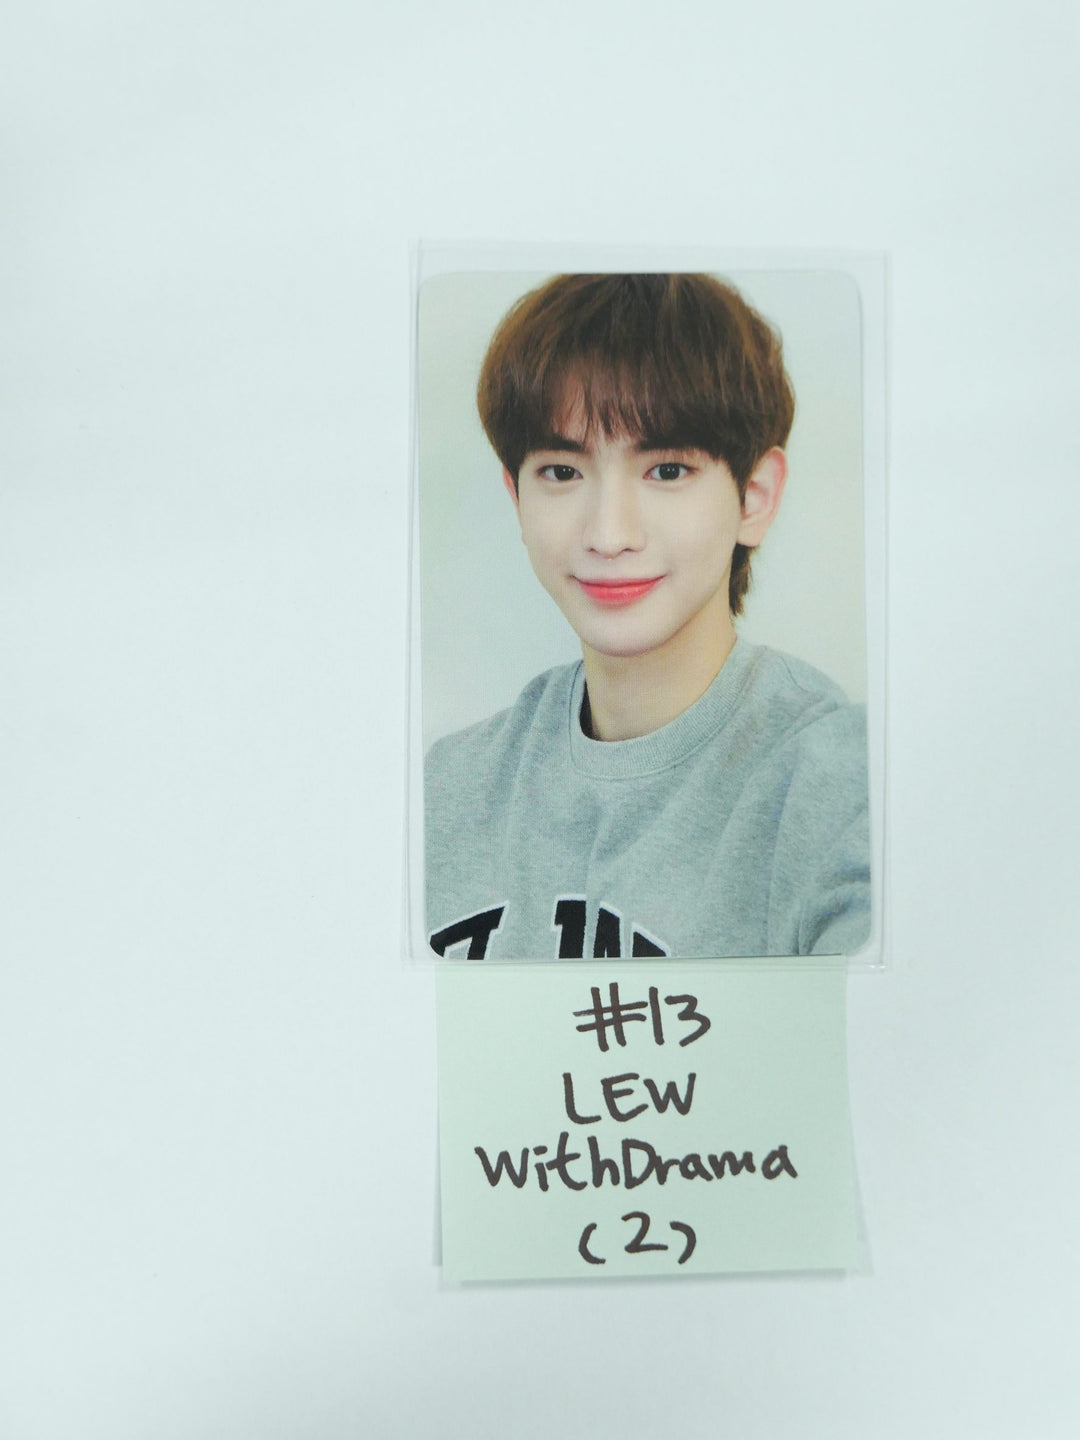 TEMPEST "It's ME" - Withdrama Luckydraw Event Photocard